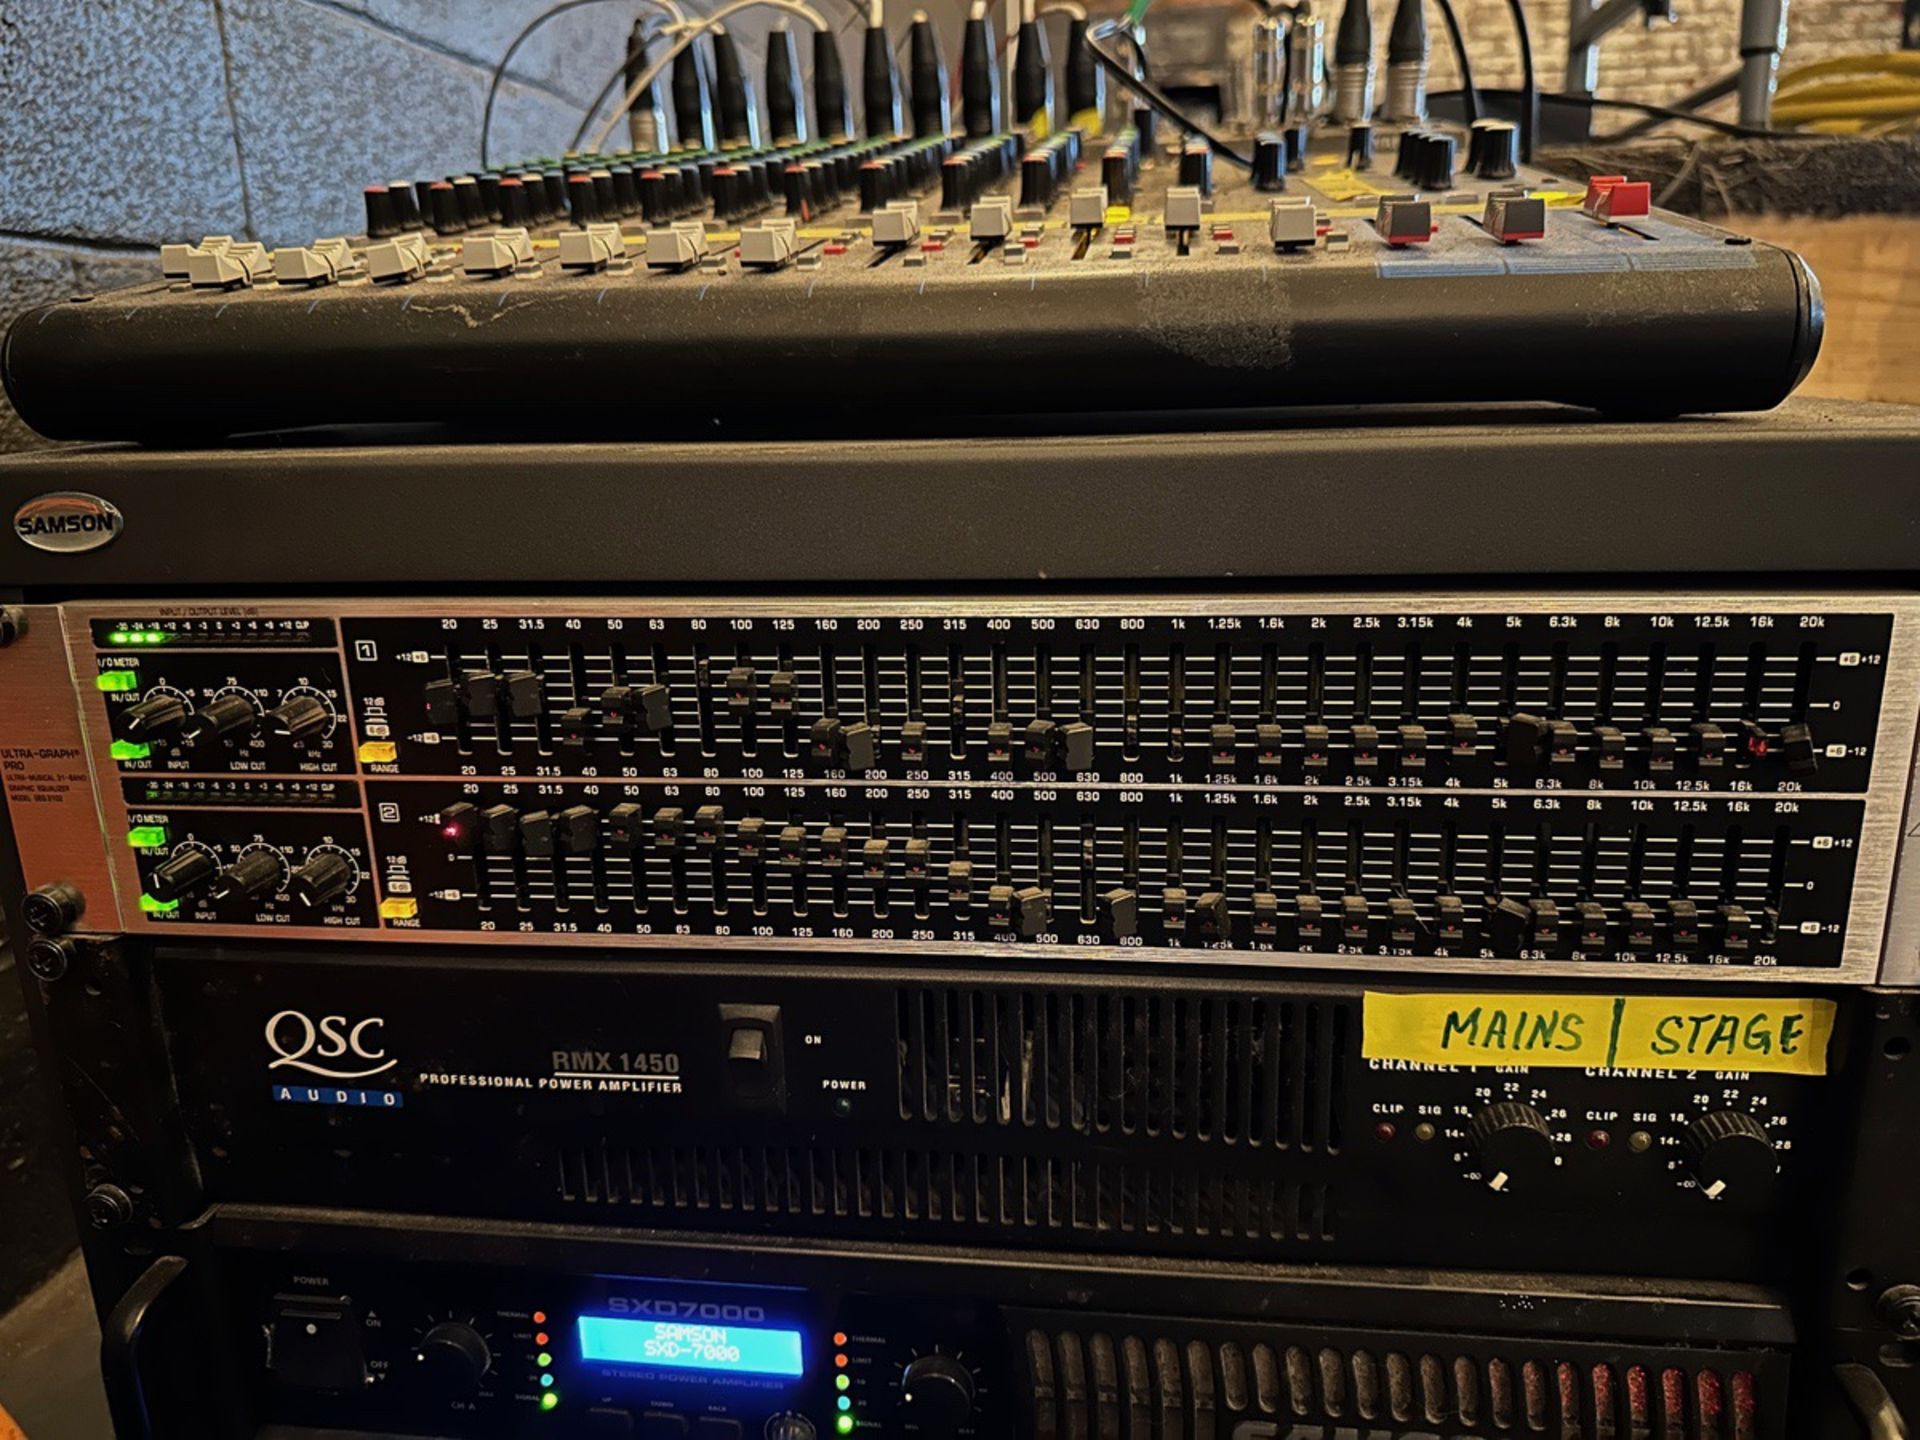 Ultra Graph Pro 31-Band Graphic Equalizer, Model GEQ 3102 | Rig Fee $50